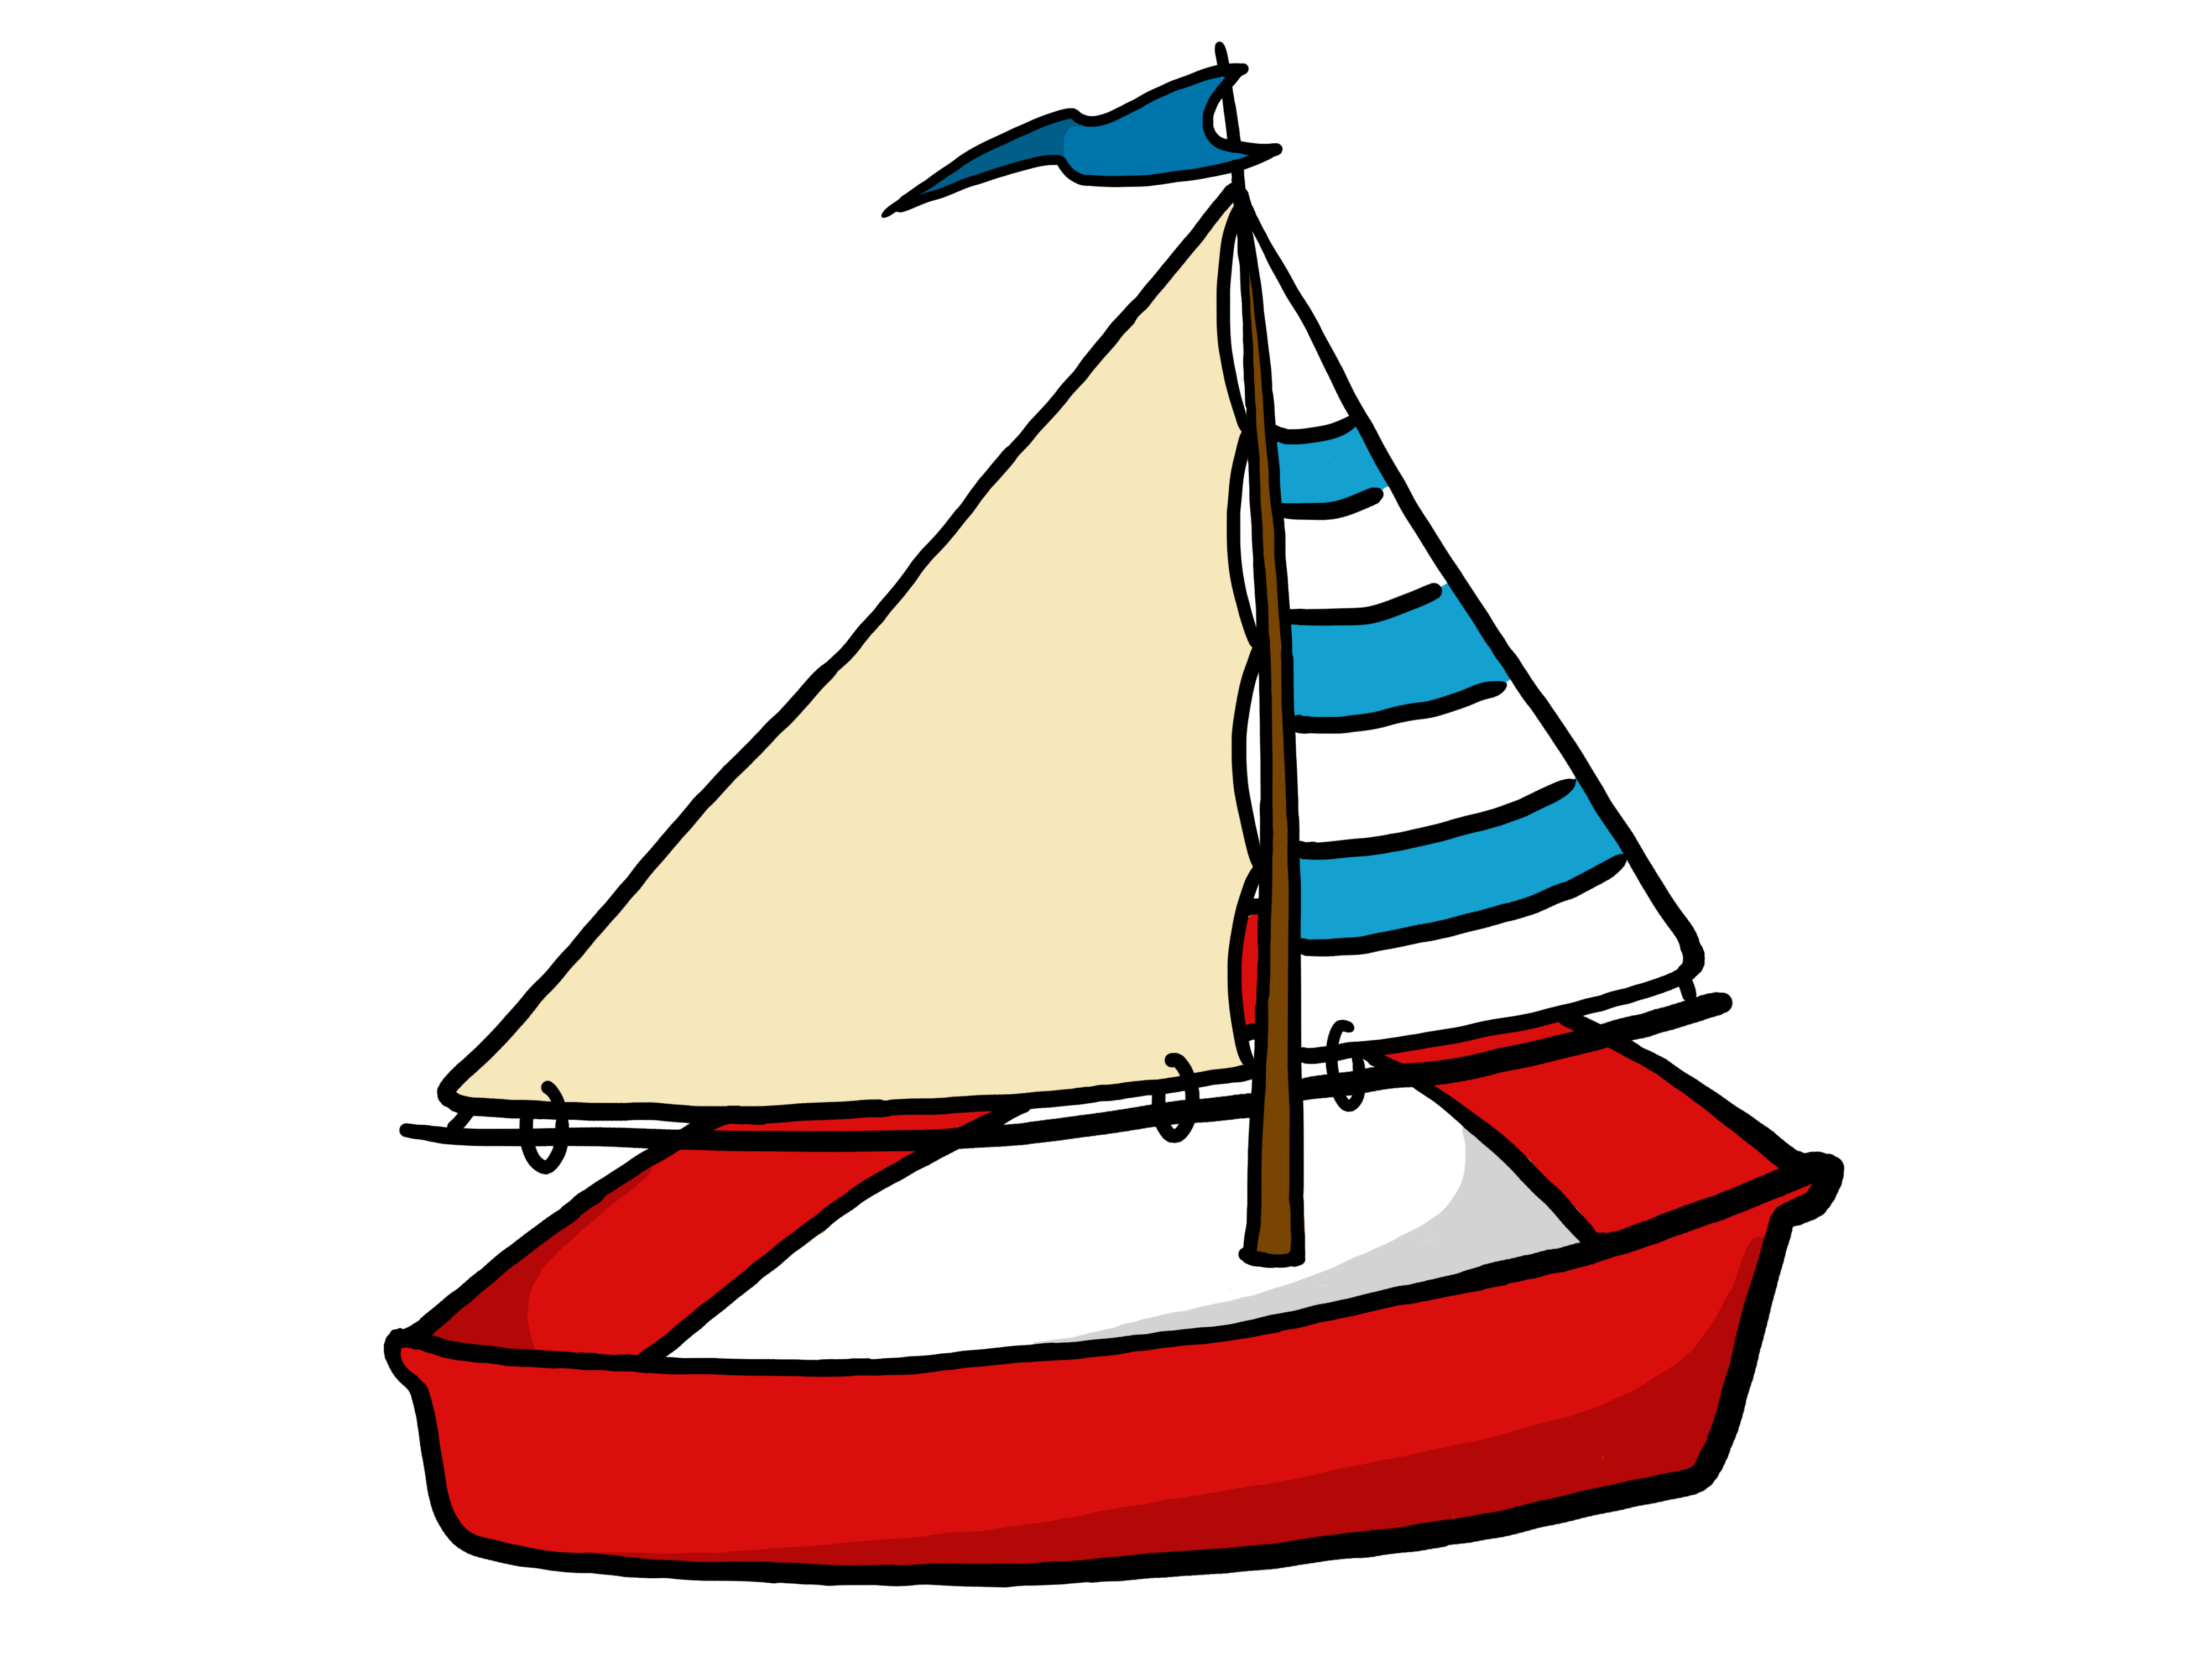 Free Clip Art Boats - Clipart library